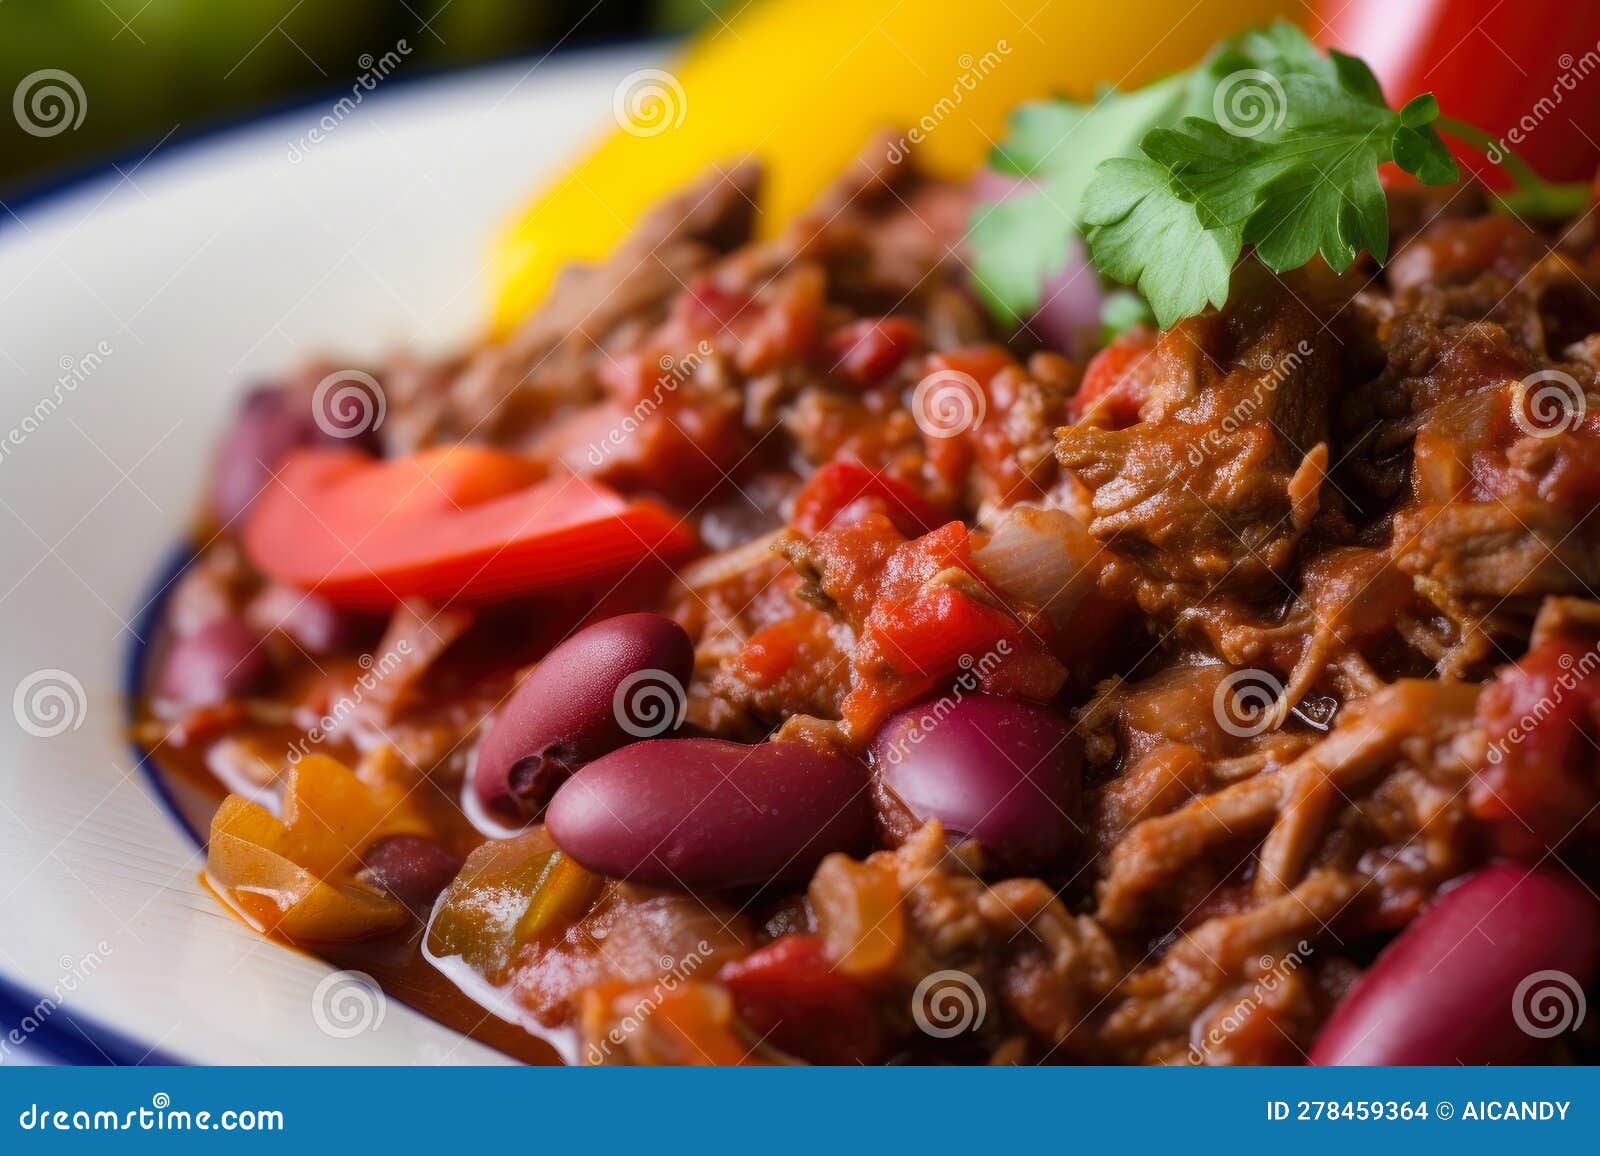 color your plate with a macro shot of chili con carne loaded with vibrant tomatoes and peppers